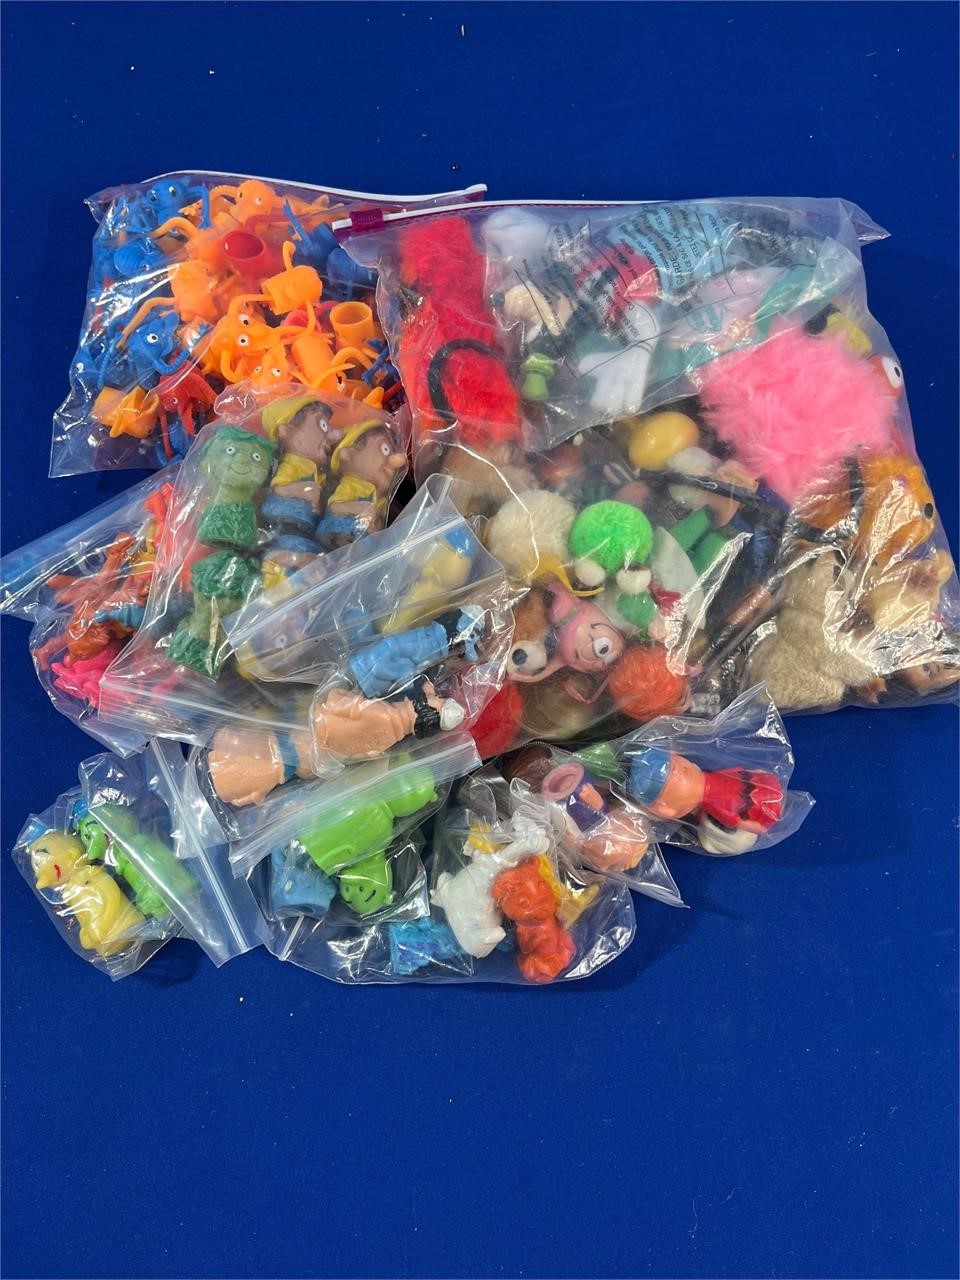 Lot of Rubber Gumball Machine Figures & Others